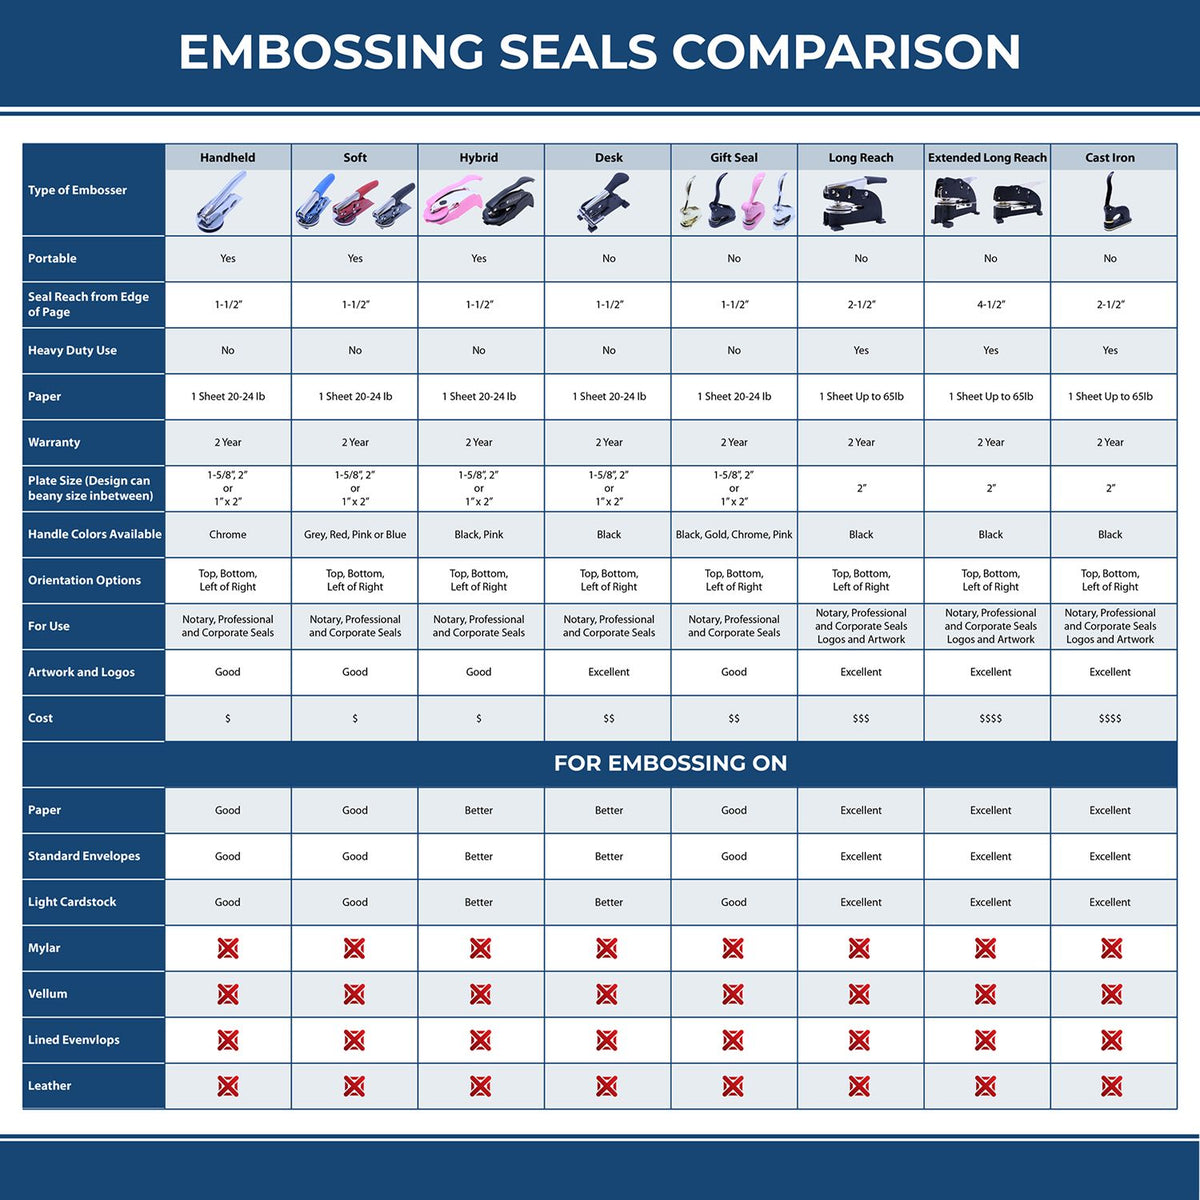 A comparison chart for the different types of mount models available for the State of Pennsylvania Long Reach Architectural Embossing Seal.